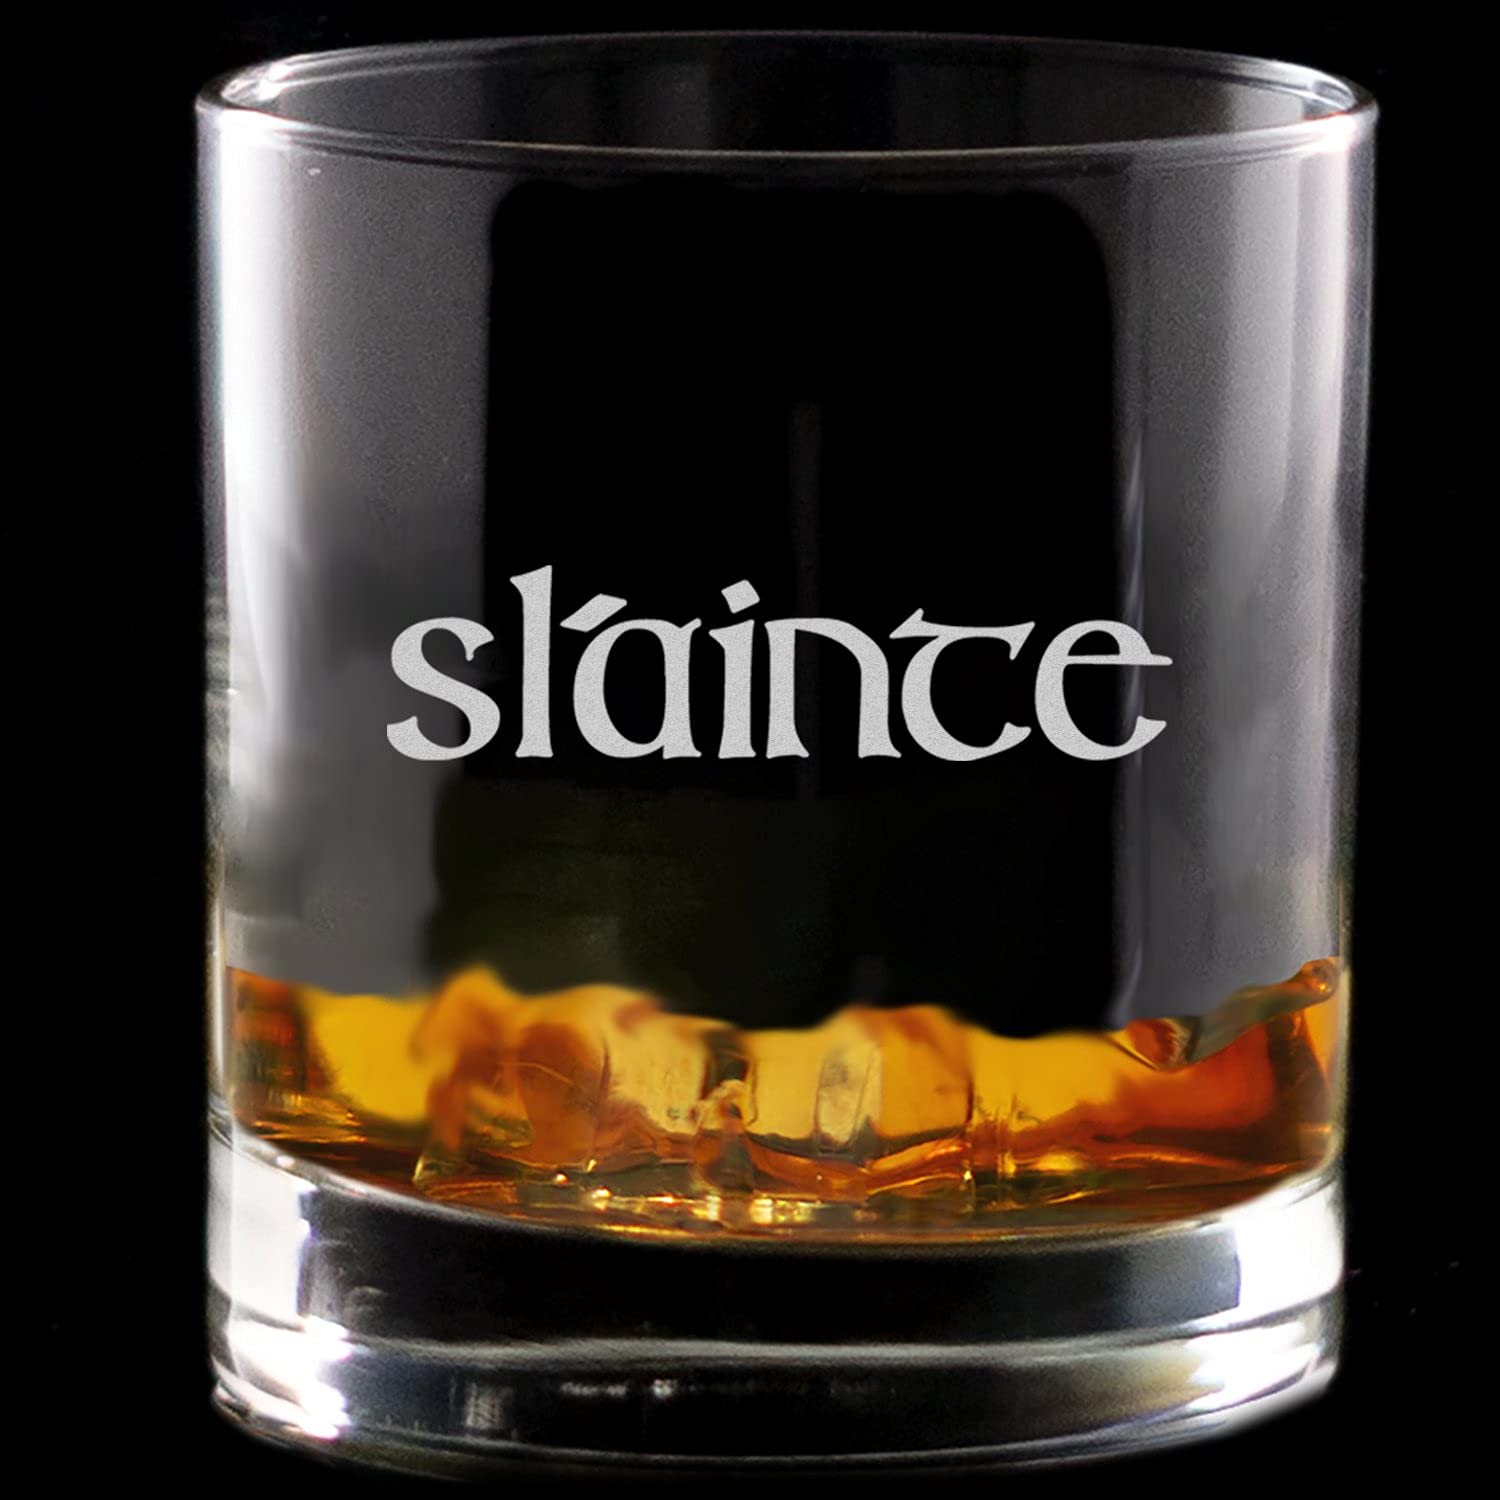 Toasted Tales - SLAINTE Whiskey Glasses | Novelty Irish Irish Celtic Gaelic Glasses for Party Decorations | Home Decor Whiskey Glasses | Irish Gifts | Gift for Mens | Glasses Made in USA (15 oz)